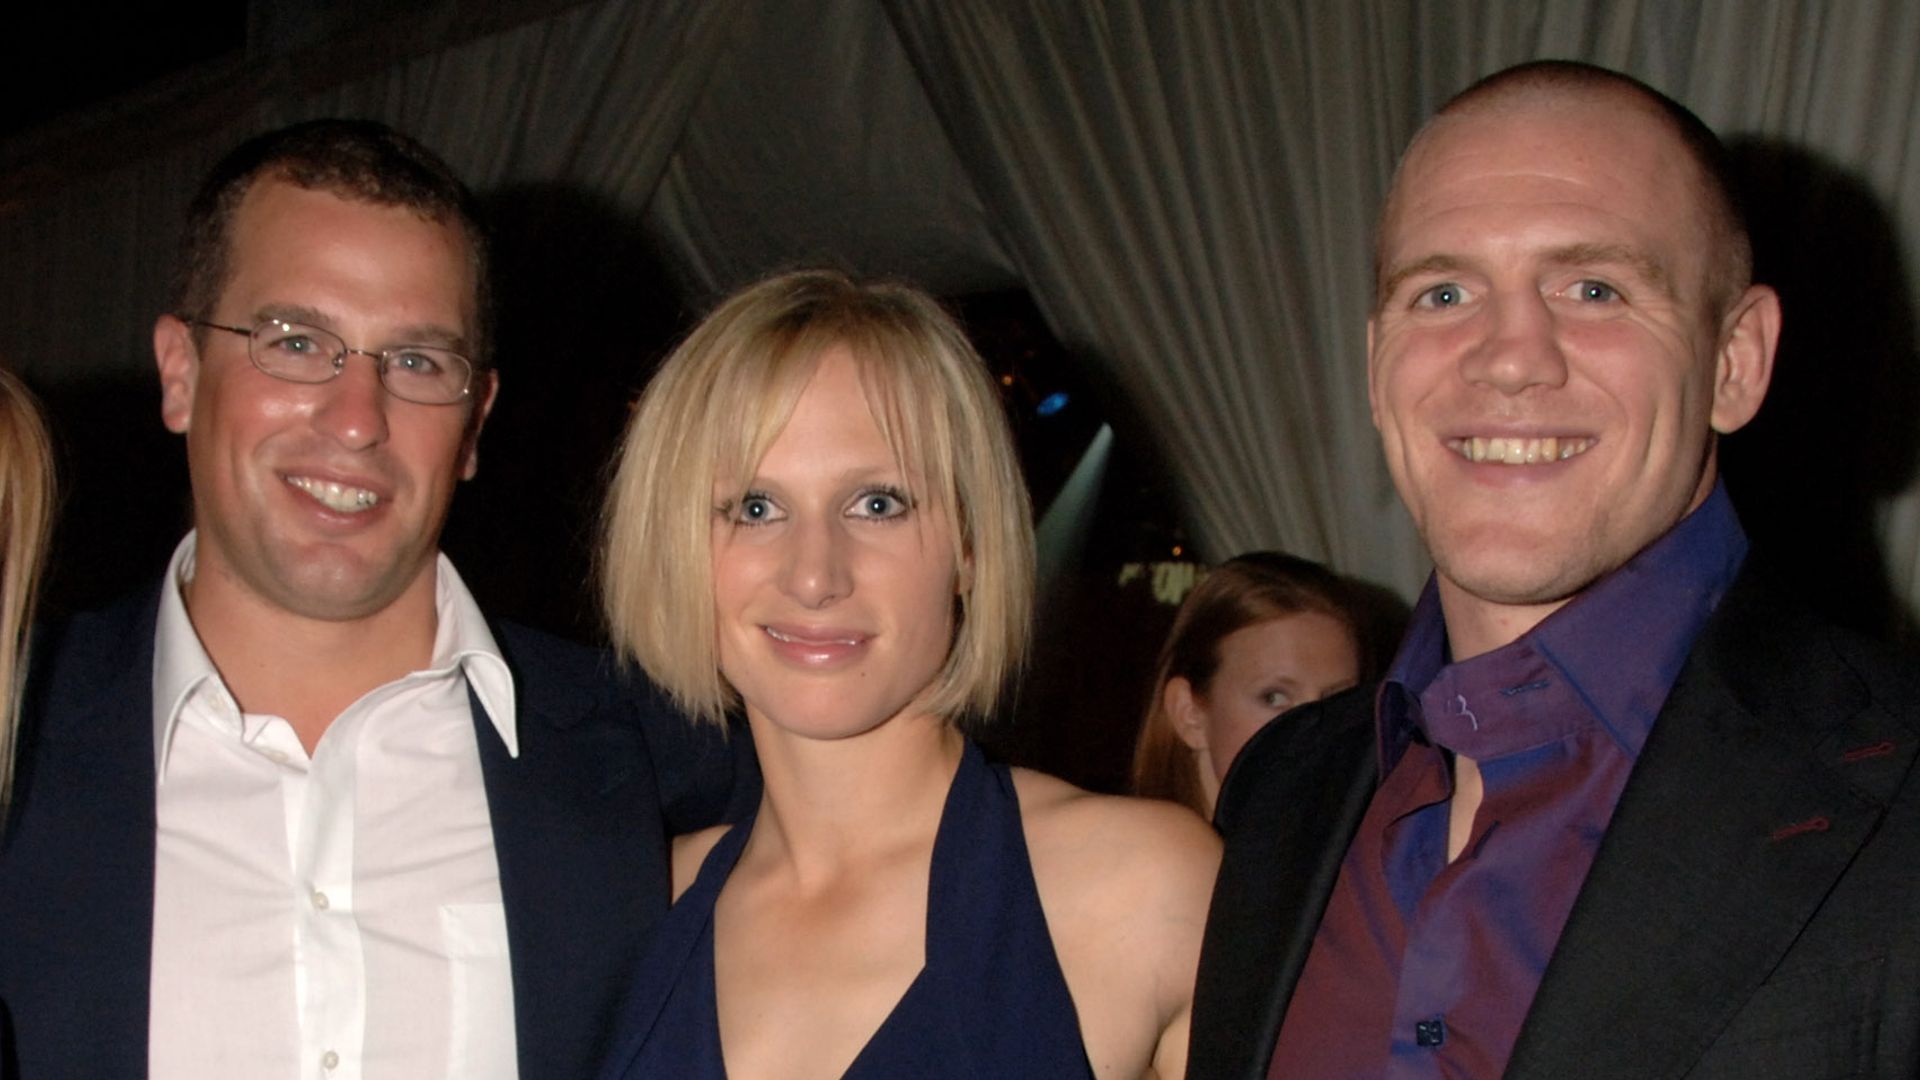 Zara Phillips (C) and Mike Tindall with brother Peter Phillips (L) in 2007